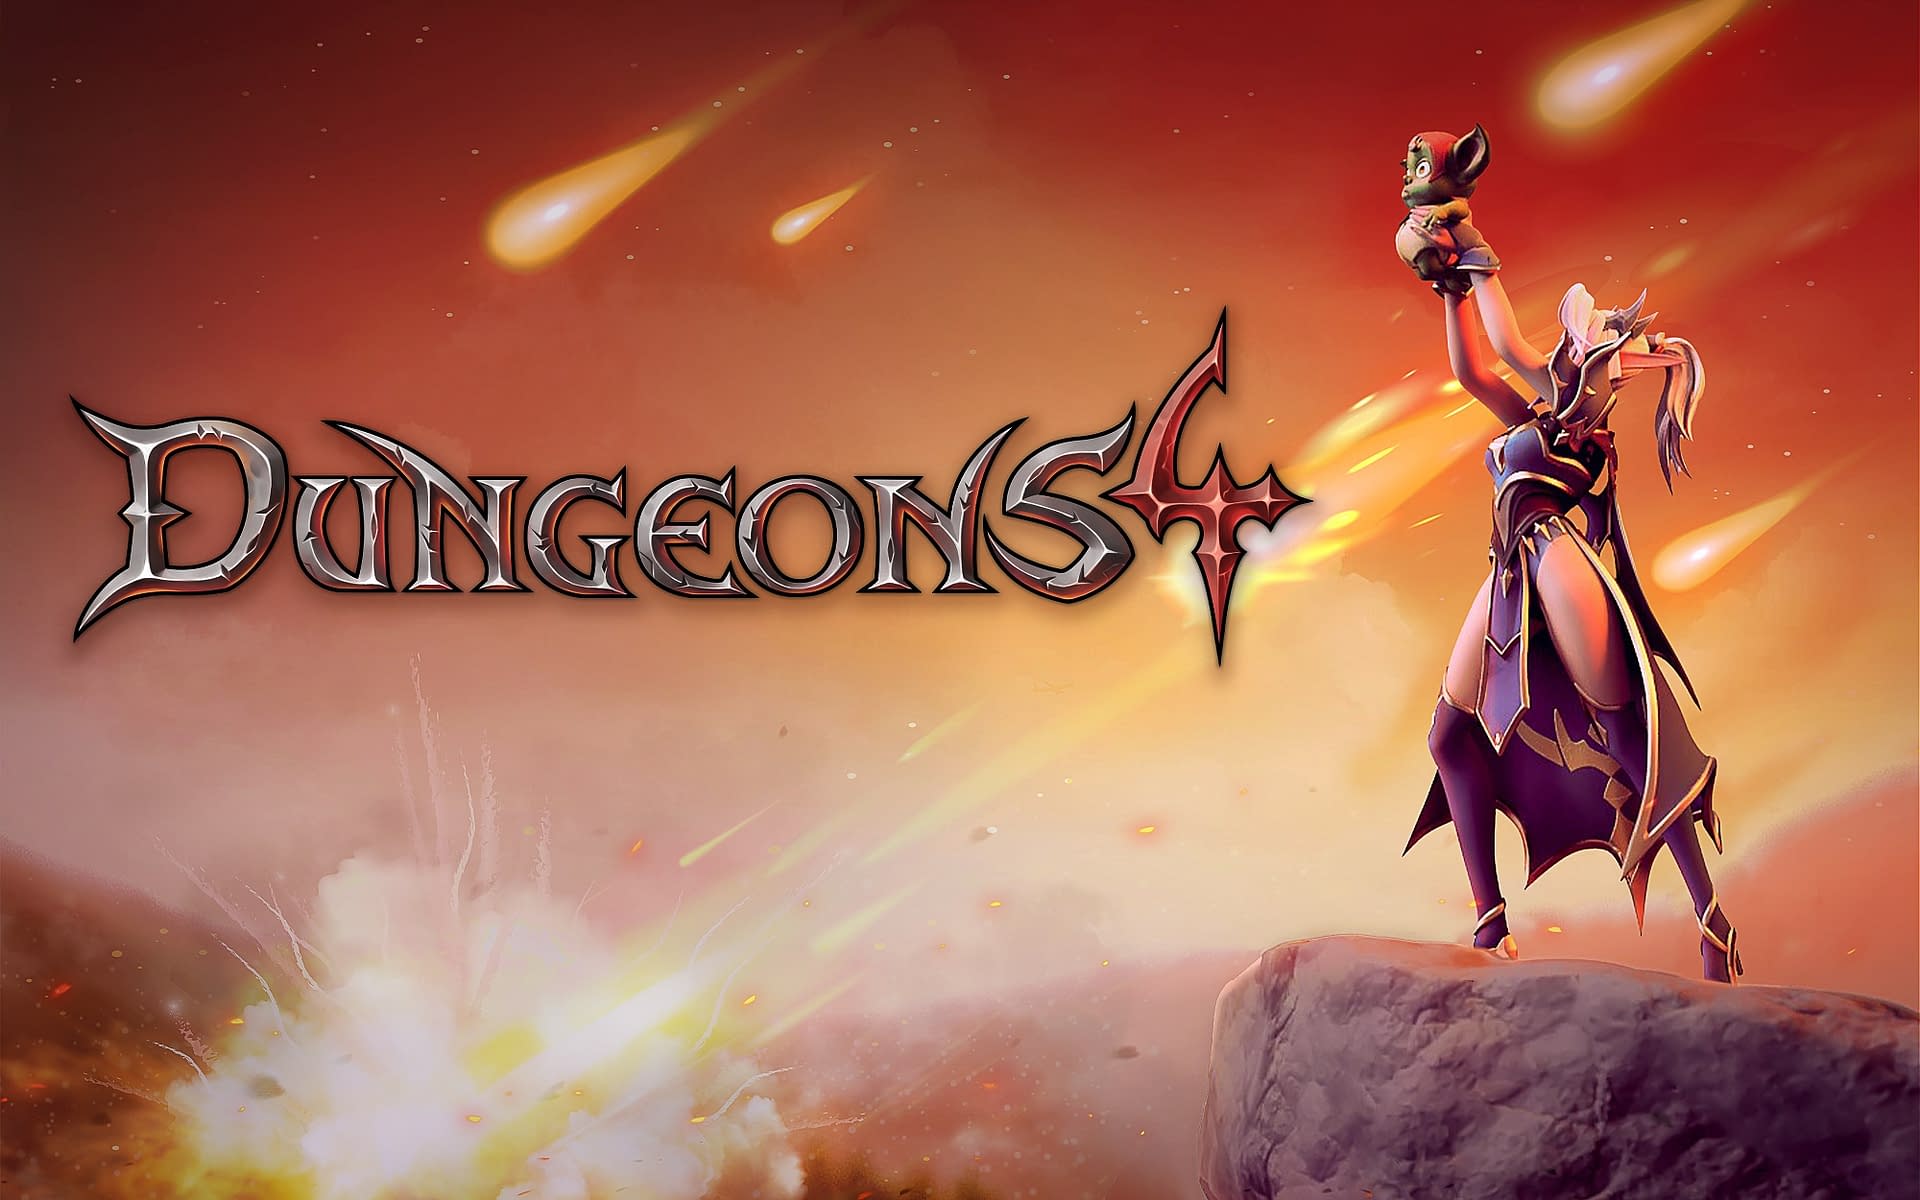 Dungeons 4 Explores The Series' Growth Ahead of Launch - Finger Guns